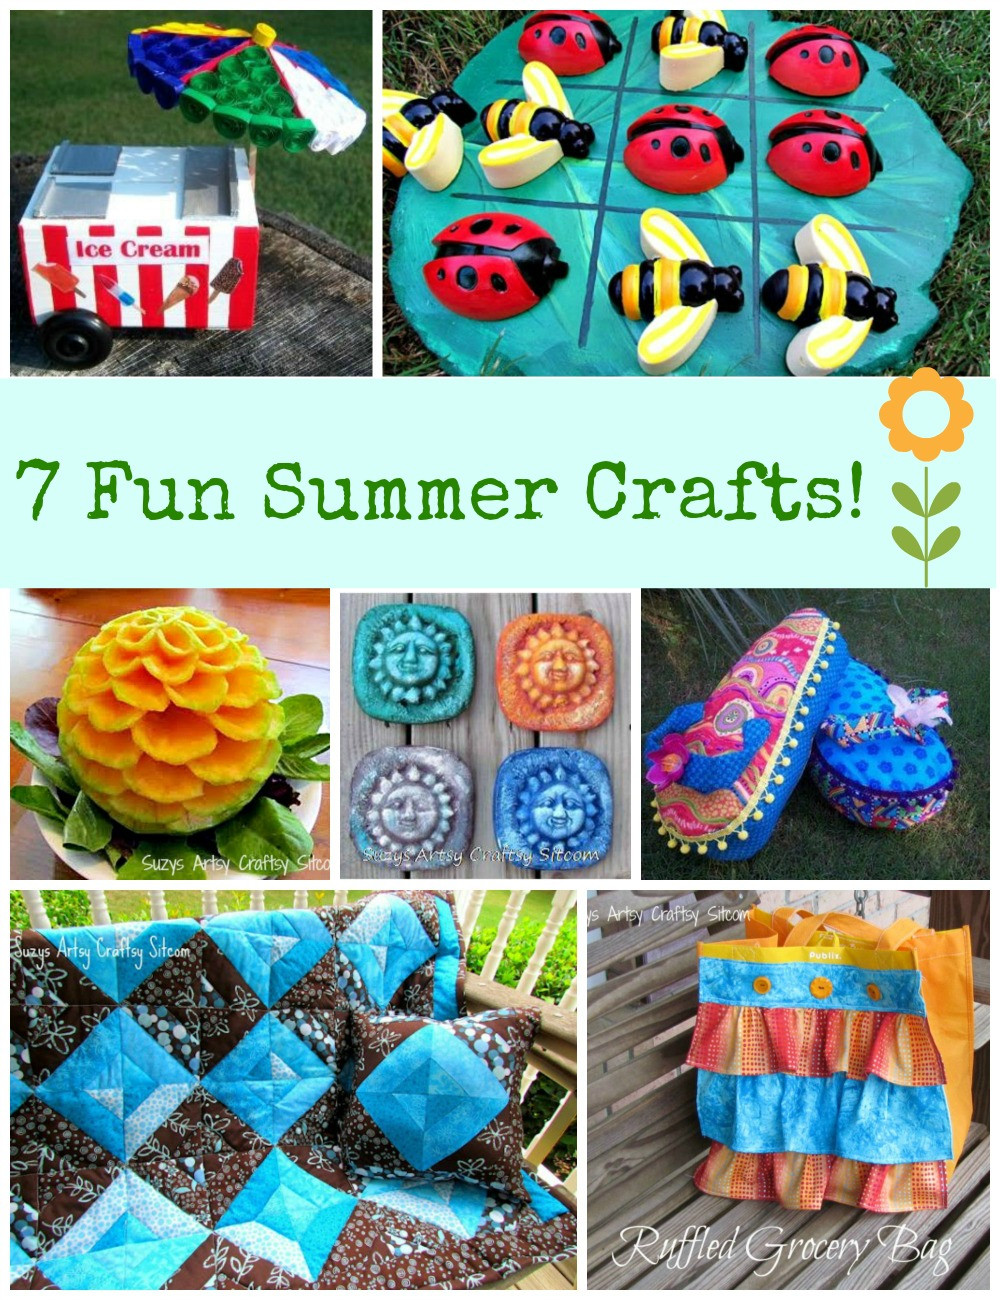 Fun Summer Crafts
 7 Fun Crafts for Summer from the Sit